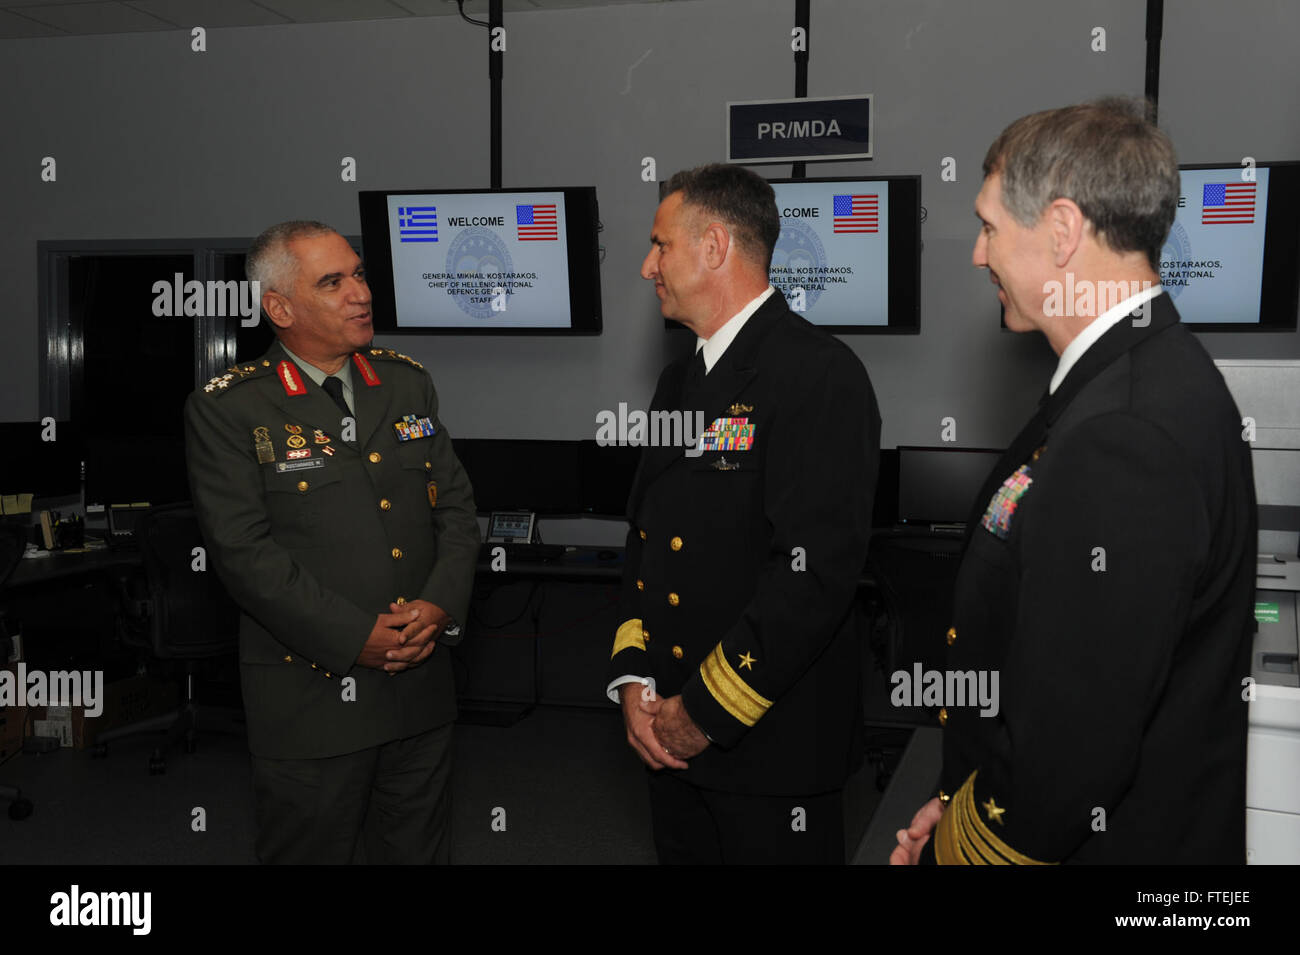 : NAPLES, Italy (Oct. 15, 2013) - Chief of the Hellenic Armed Forces General Staff, Gen. Mikhail Kostarakos, speaks with Rear Adm. Robert P. Burke, deputy commander, U.S. 6th Fleet, and Adm. Bruce Clingan, commander, U.S. Naval Forces Europe-Africa, in the Maritime Operations Center at U.S. Naval Forces Europe-Africa/U.S. 6th Fleet headquarters during his visit to Naval Support Activity Naples, Capodichino. Stock Photo